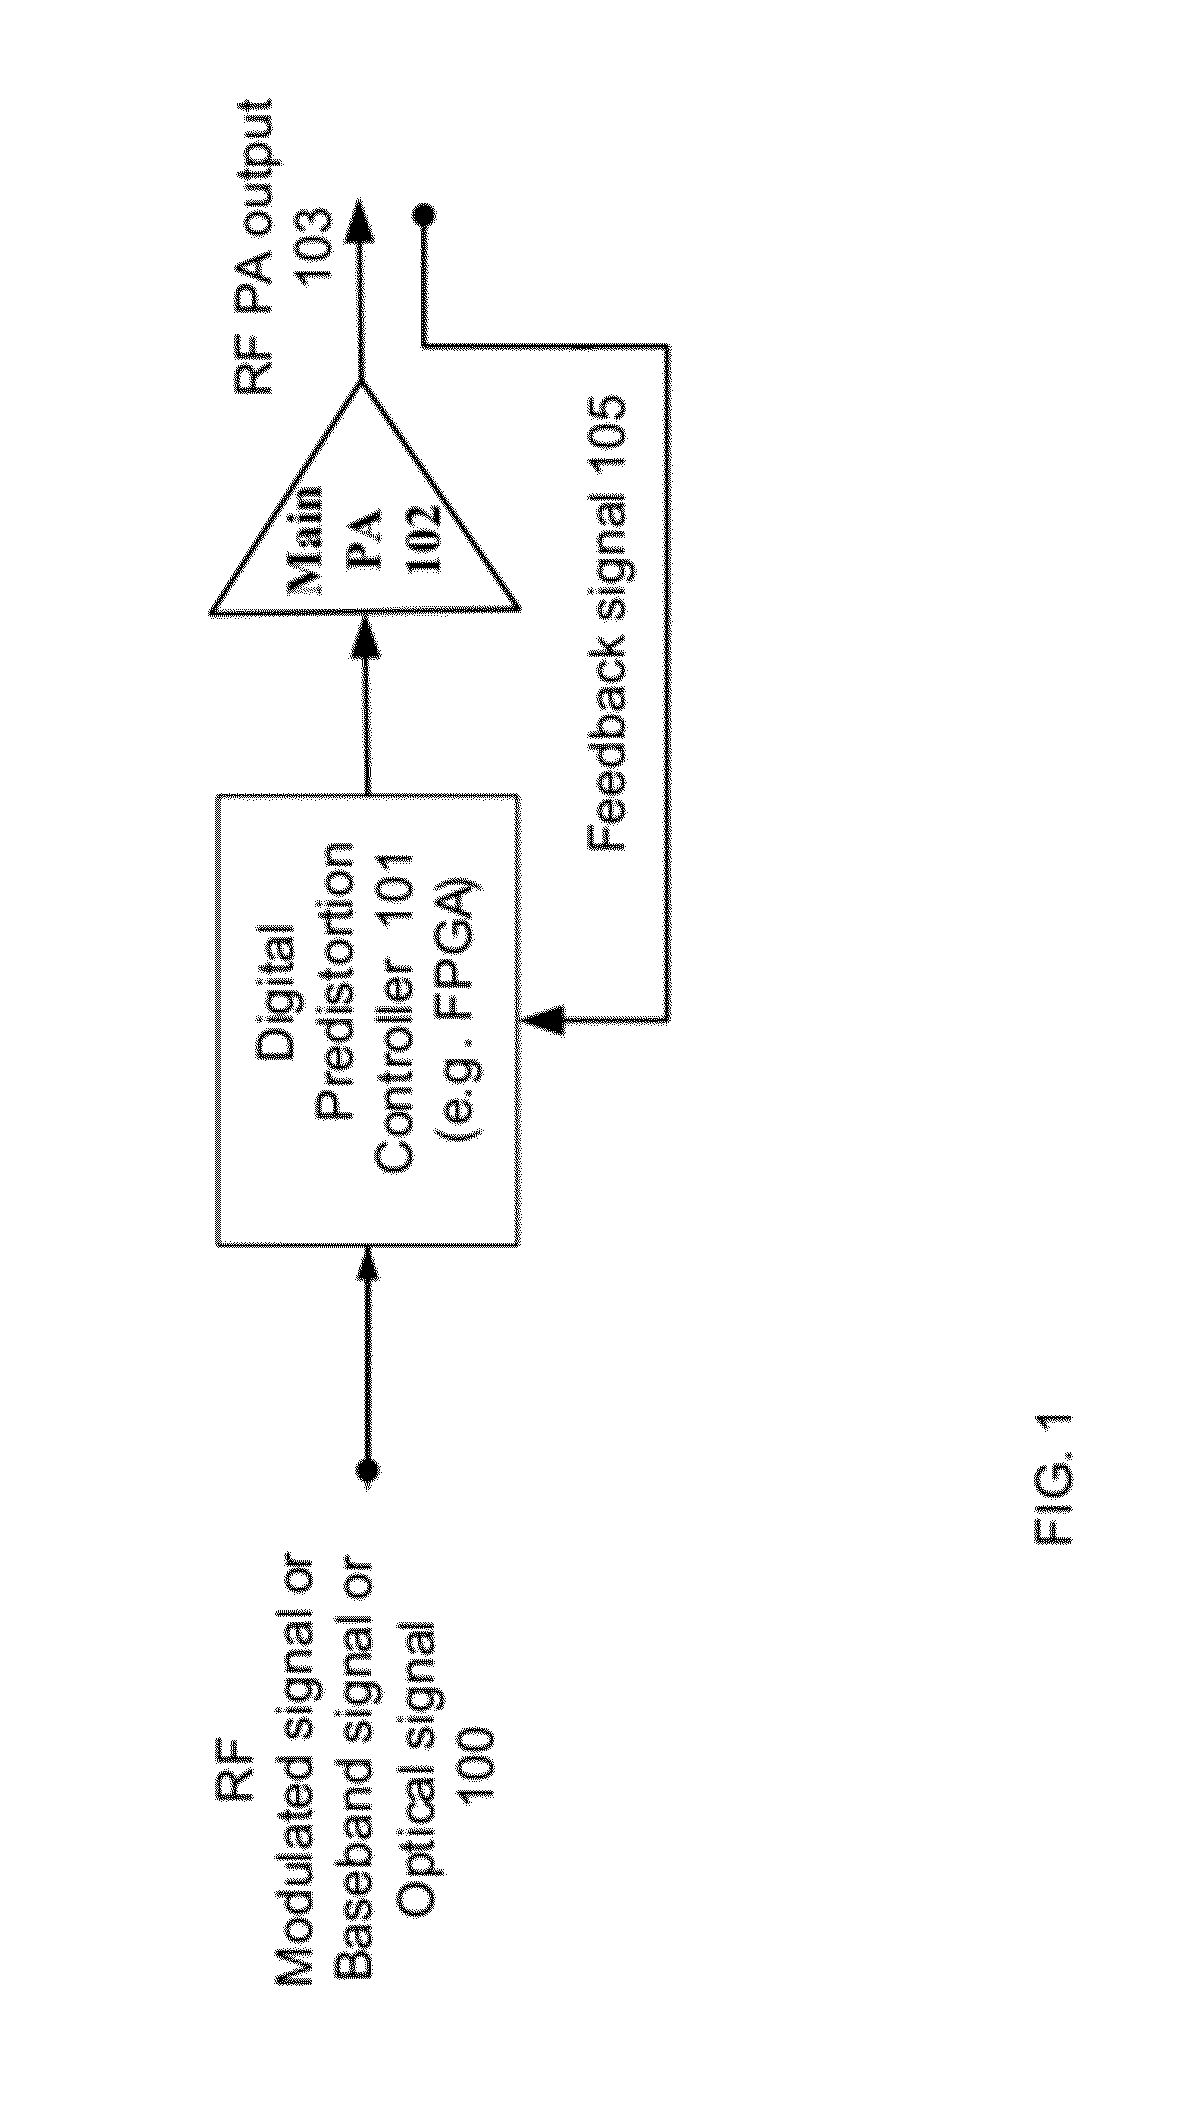 Multi-band wideband power amplifier digital predistorition system and method